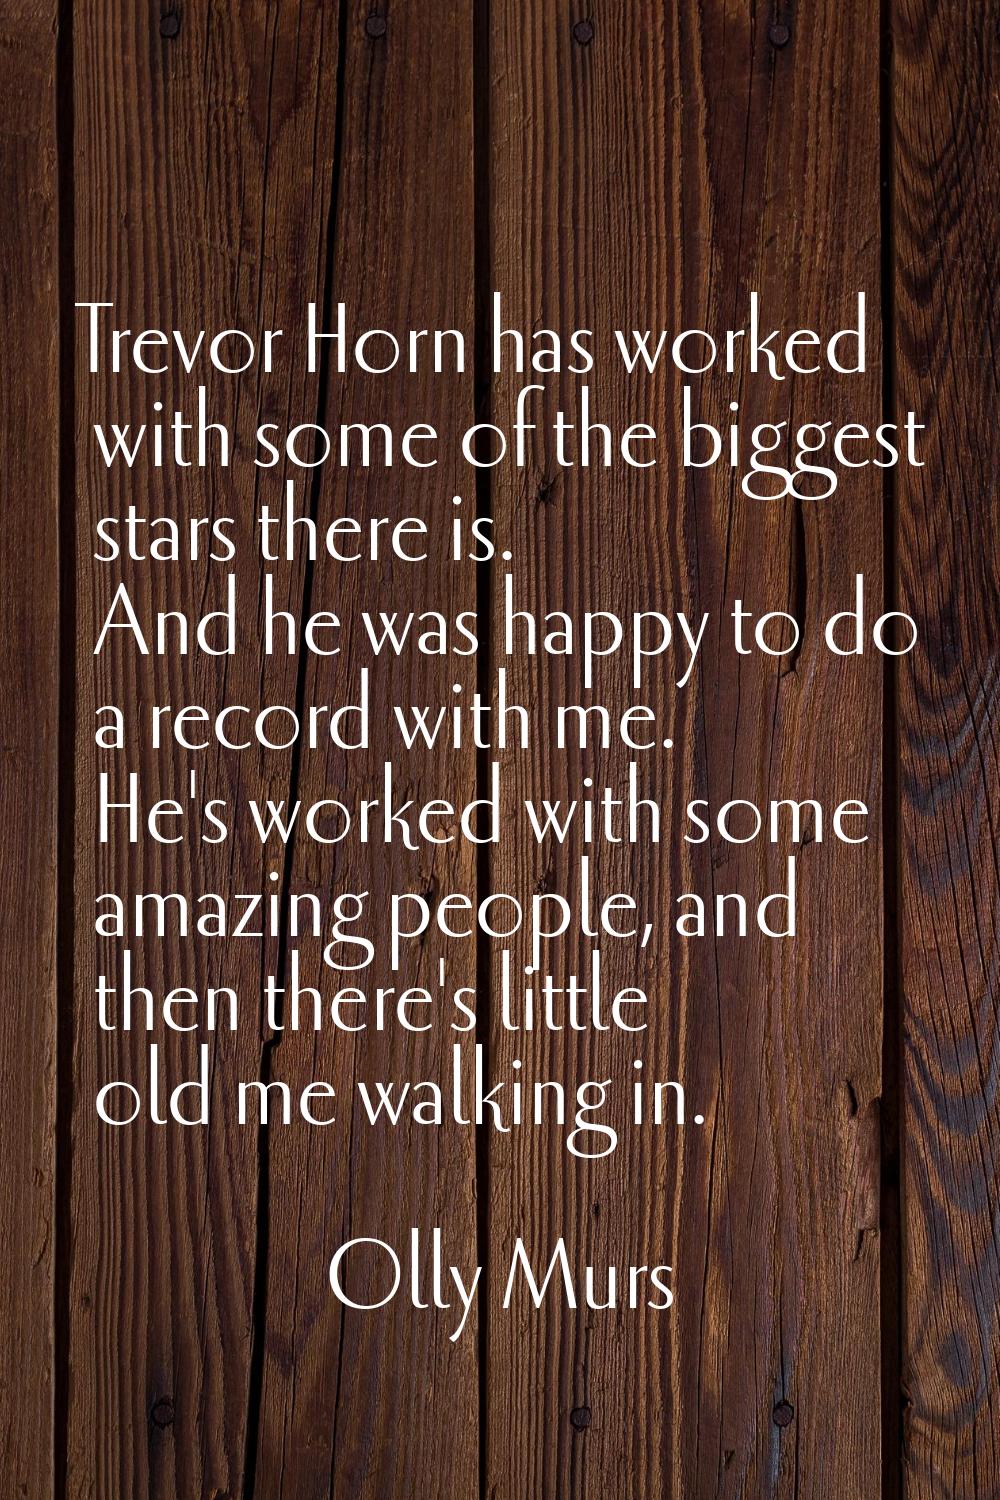 Trevor Horn has worked with some of the biggest stars there is. And he was happy to do a record wit